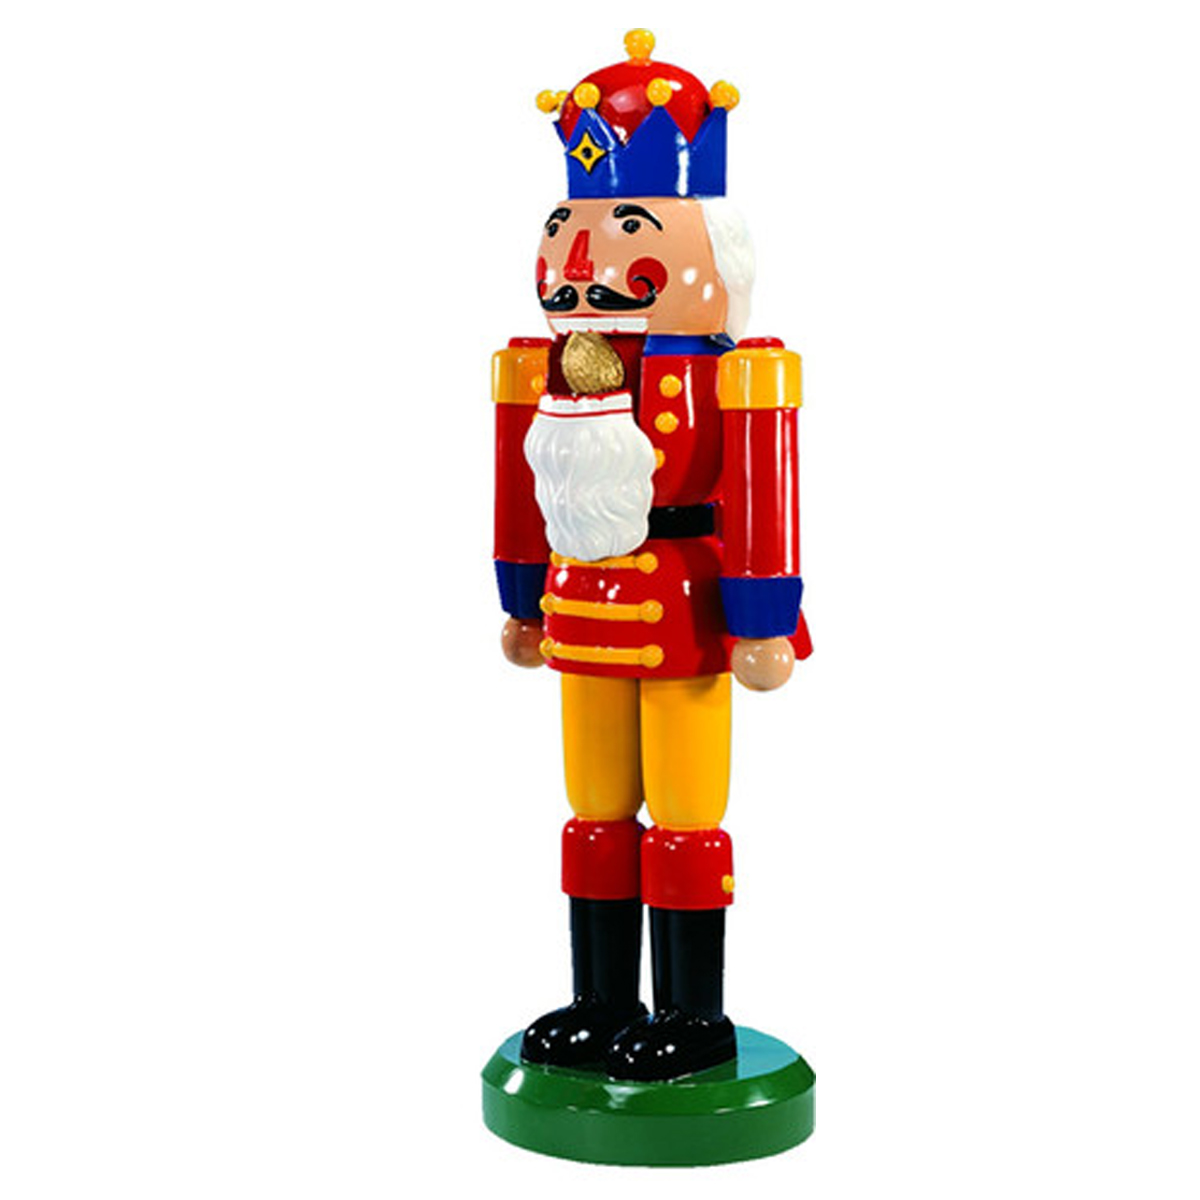 Red and Yellow Nutcracker